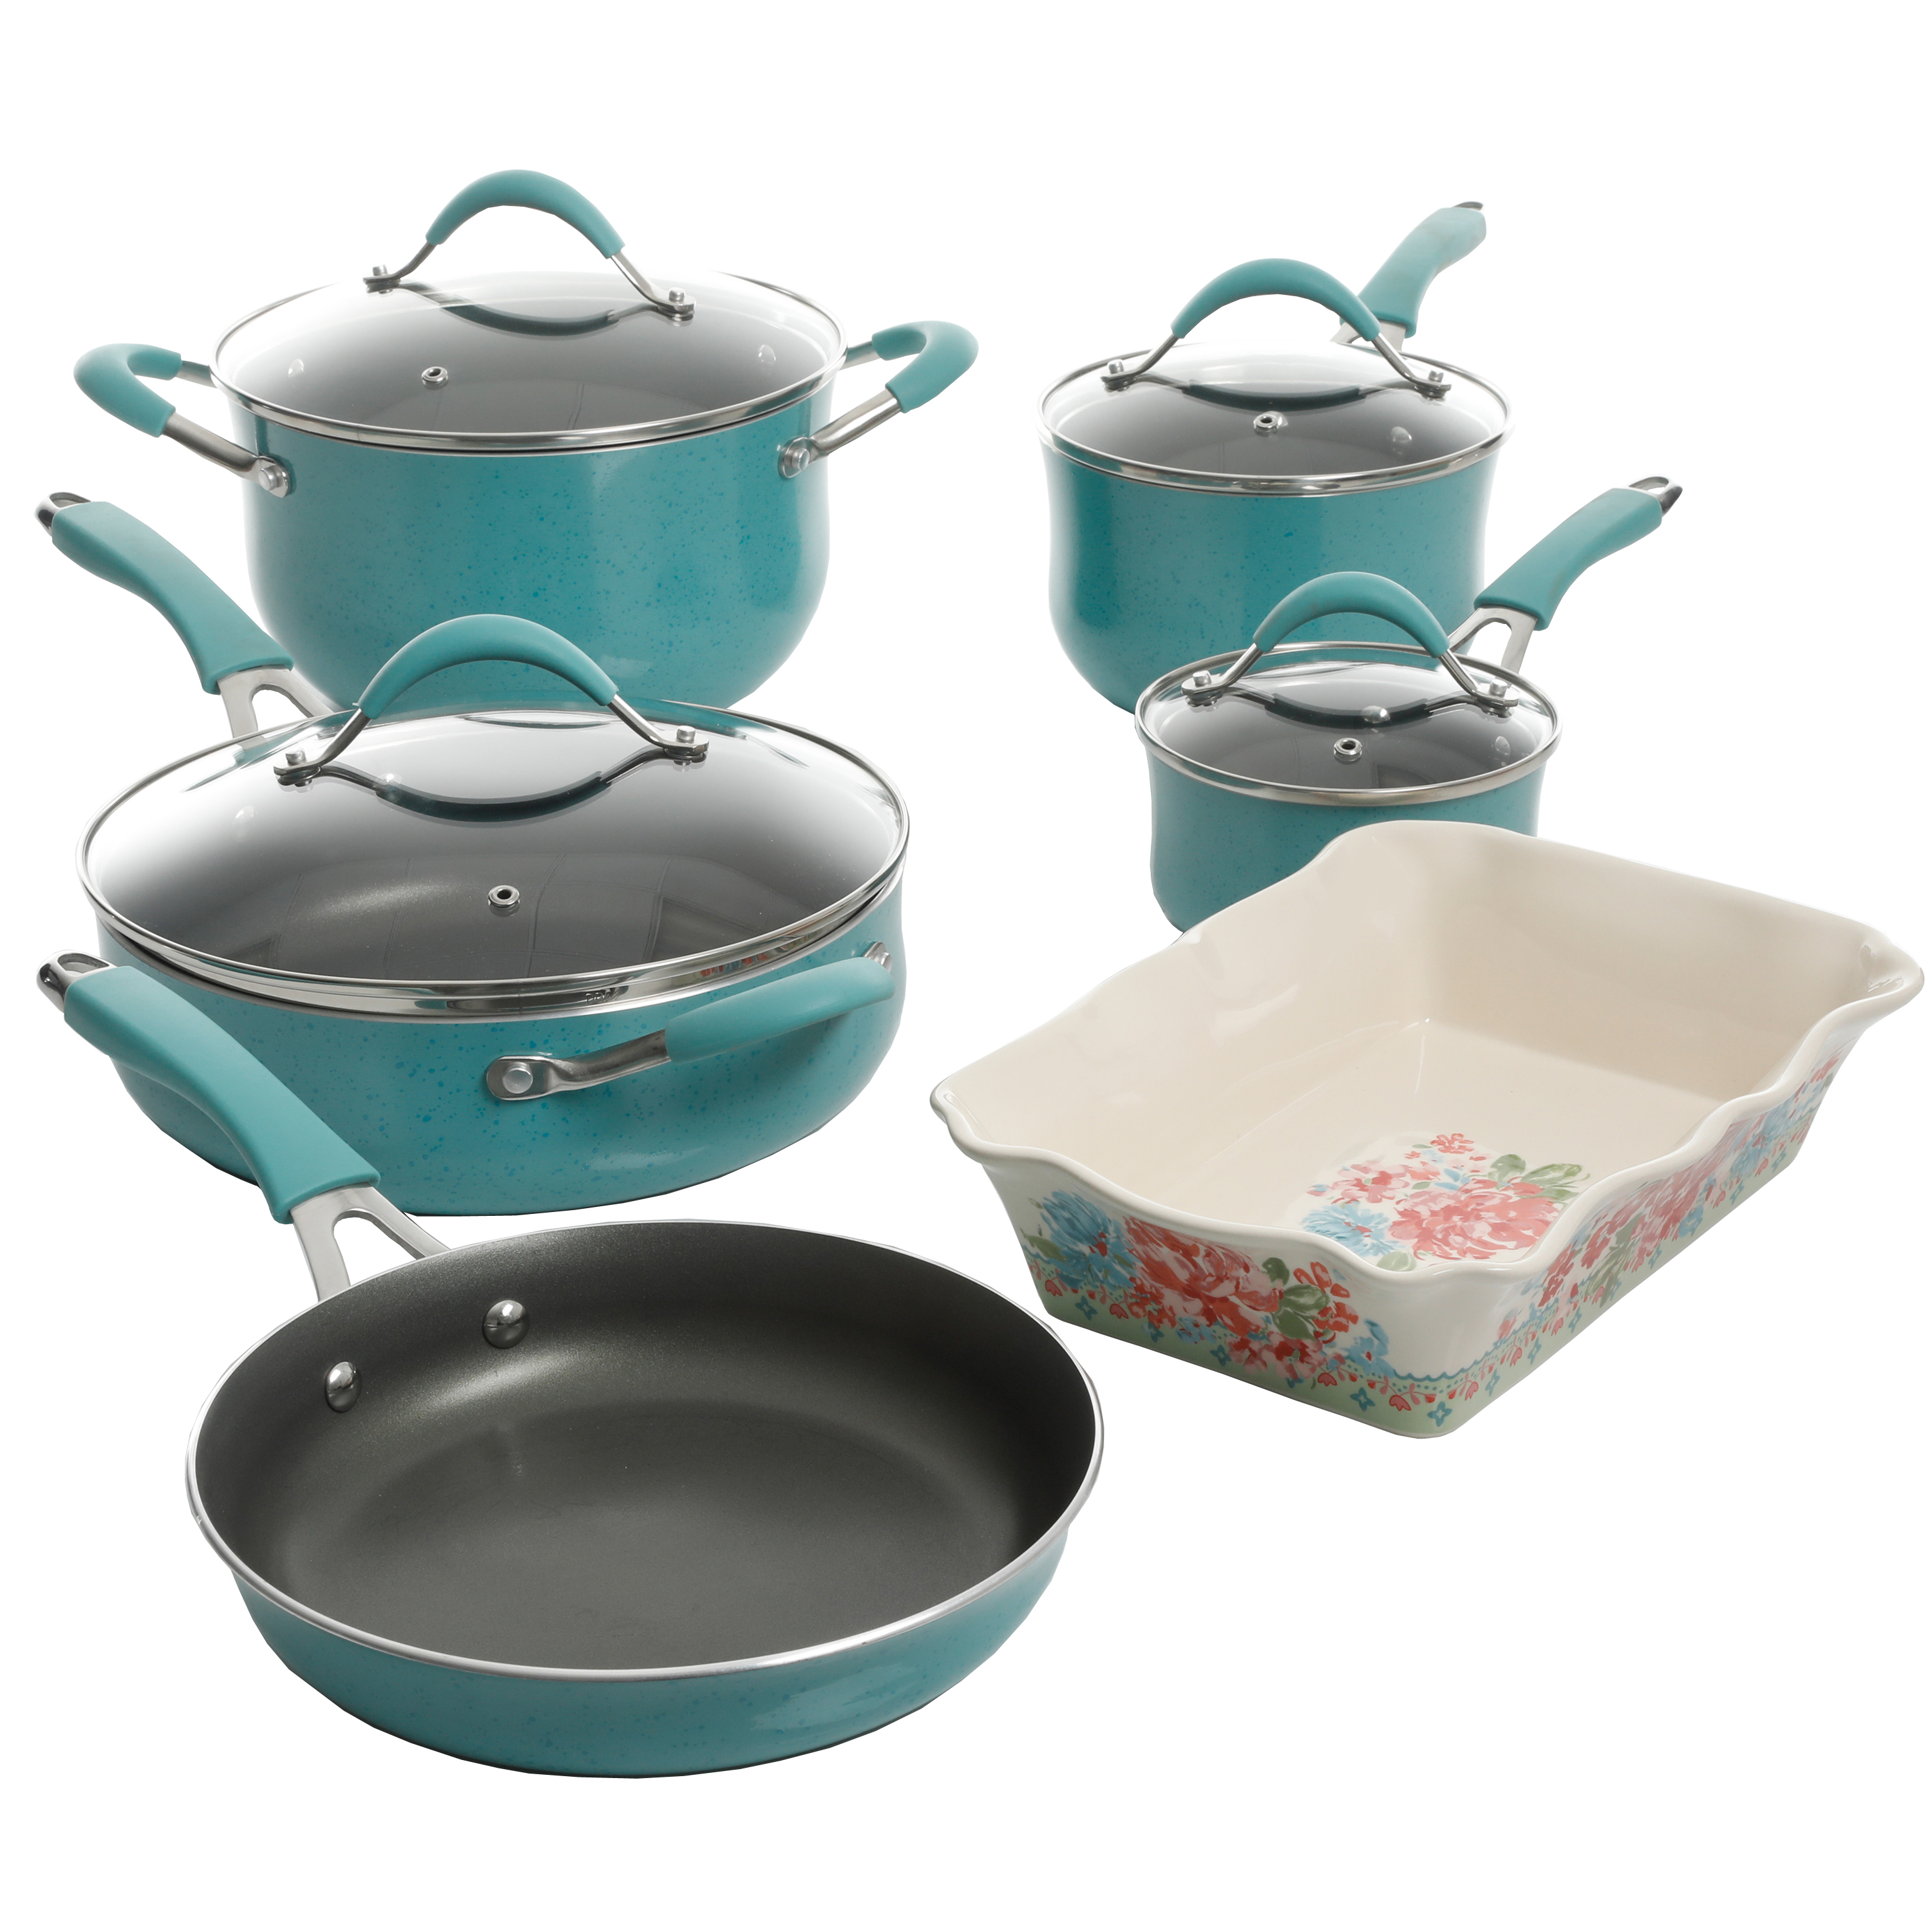 The Pioneer Woman Frontier Speckle Aluminum 10-Piece Cookware Set, Turquoise - image 1 of 9